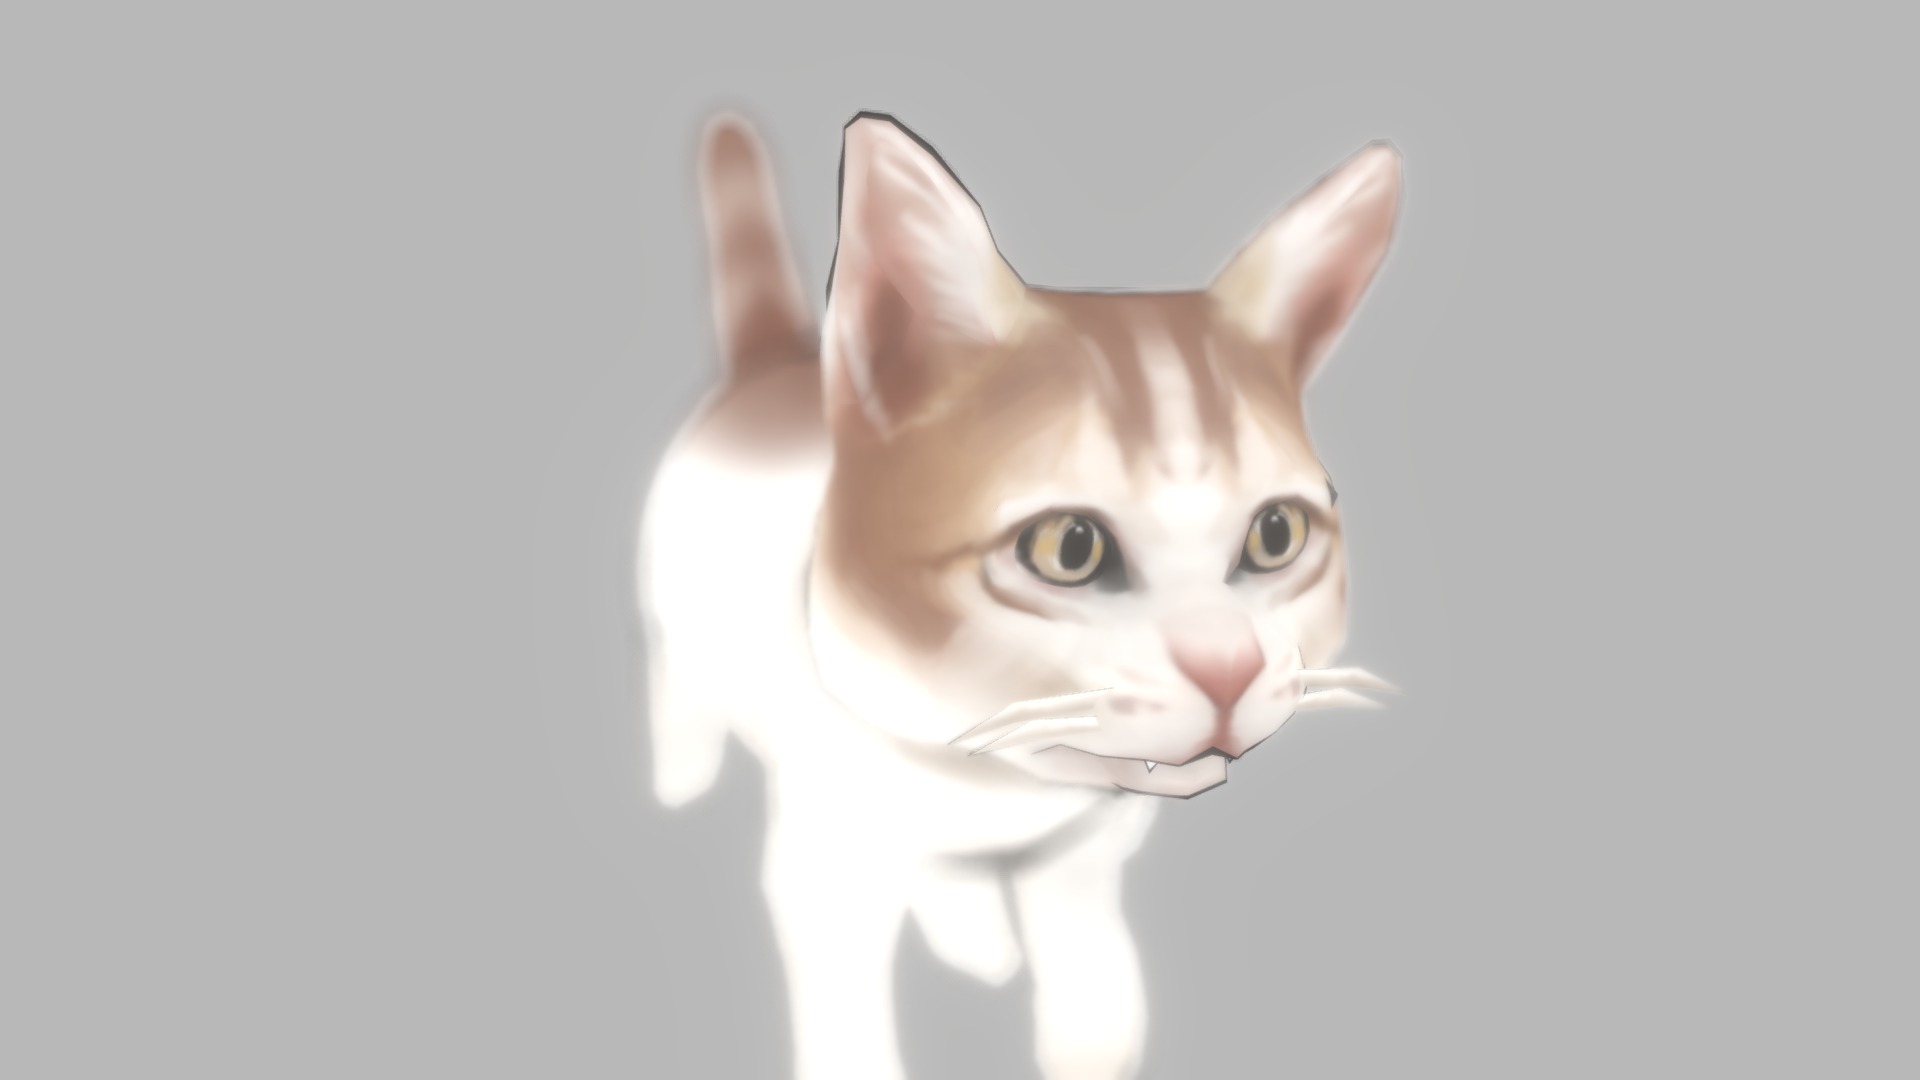 3D model cat - This is a 3D model of the cat. The 3D model is about a cat with a human face.